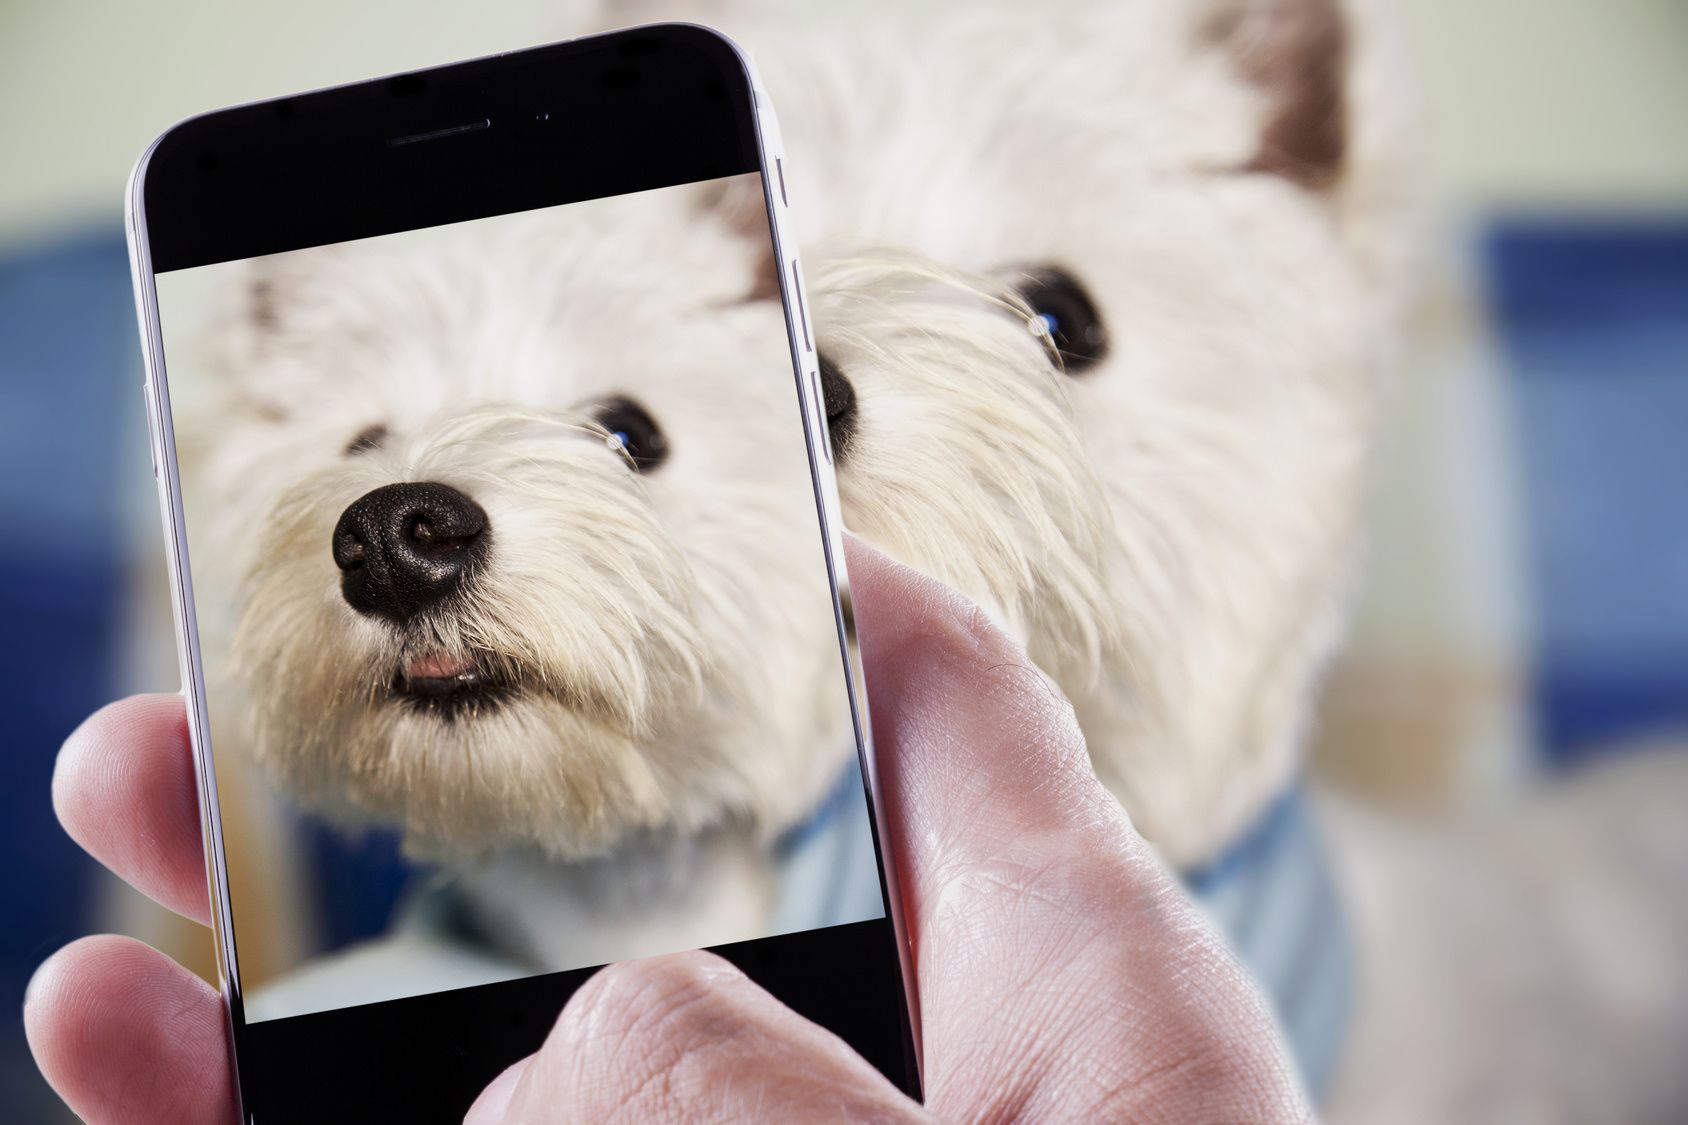 Male hand with smartphone taking a photo of a dog